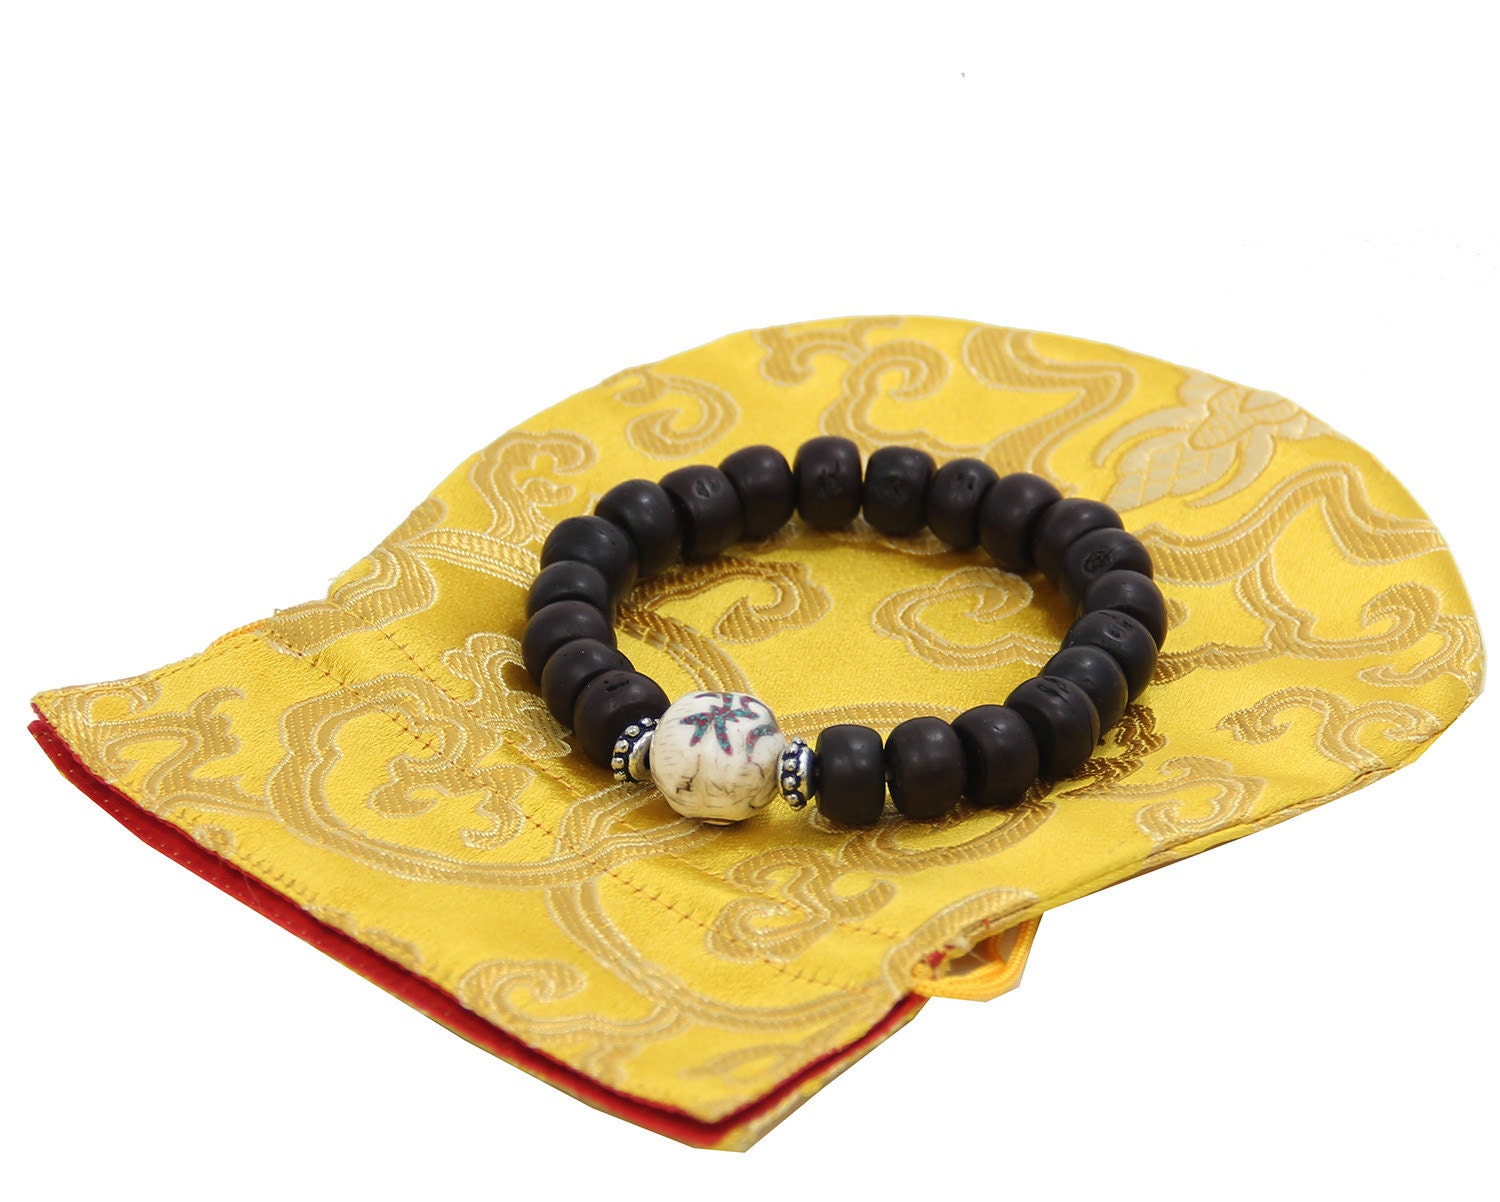 Buy Tibetan Buddhist 21 Beads Old Bodhi Seedwrist Mala Bracelet Conch Shell  Accent Online in India - Etsy